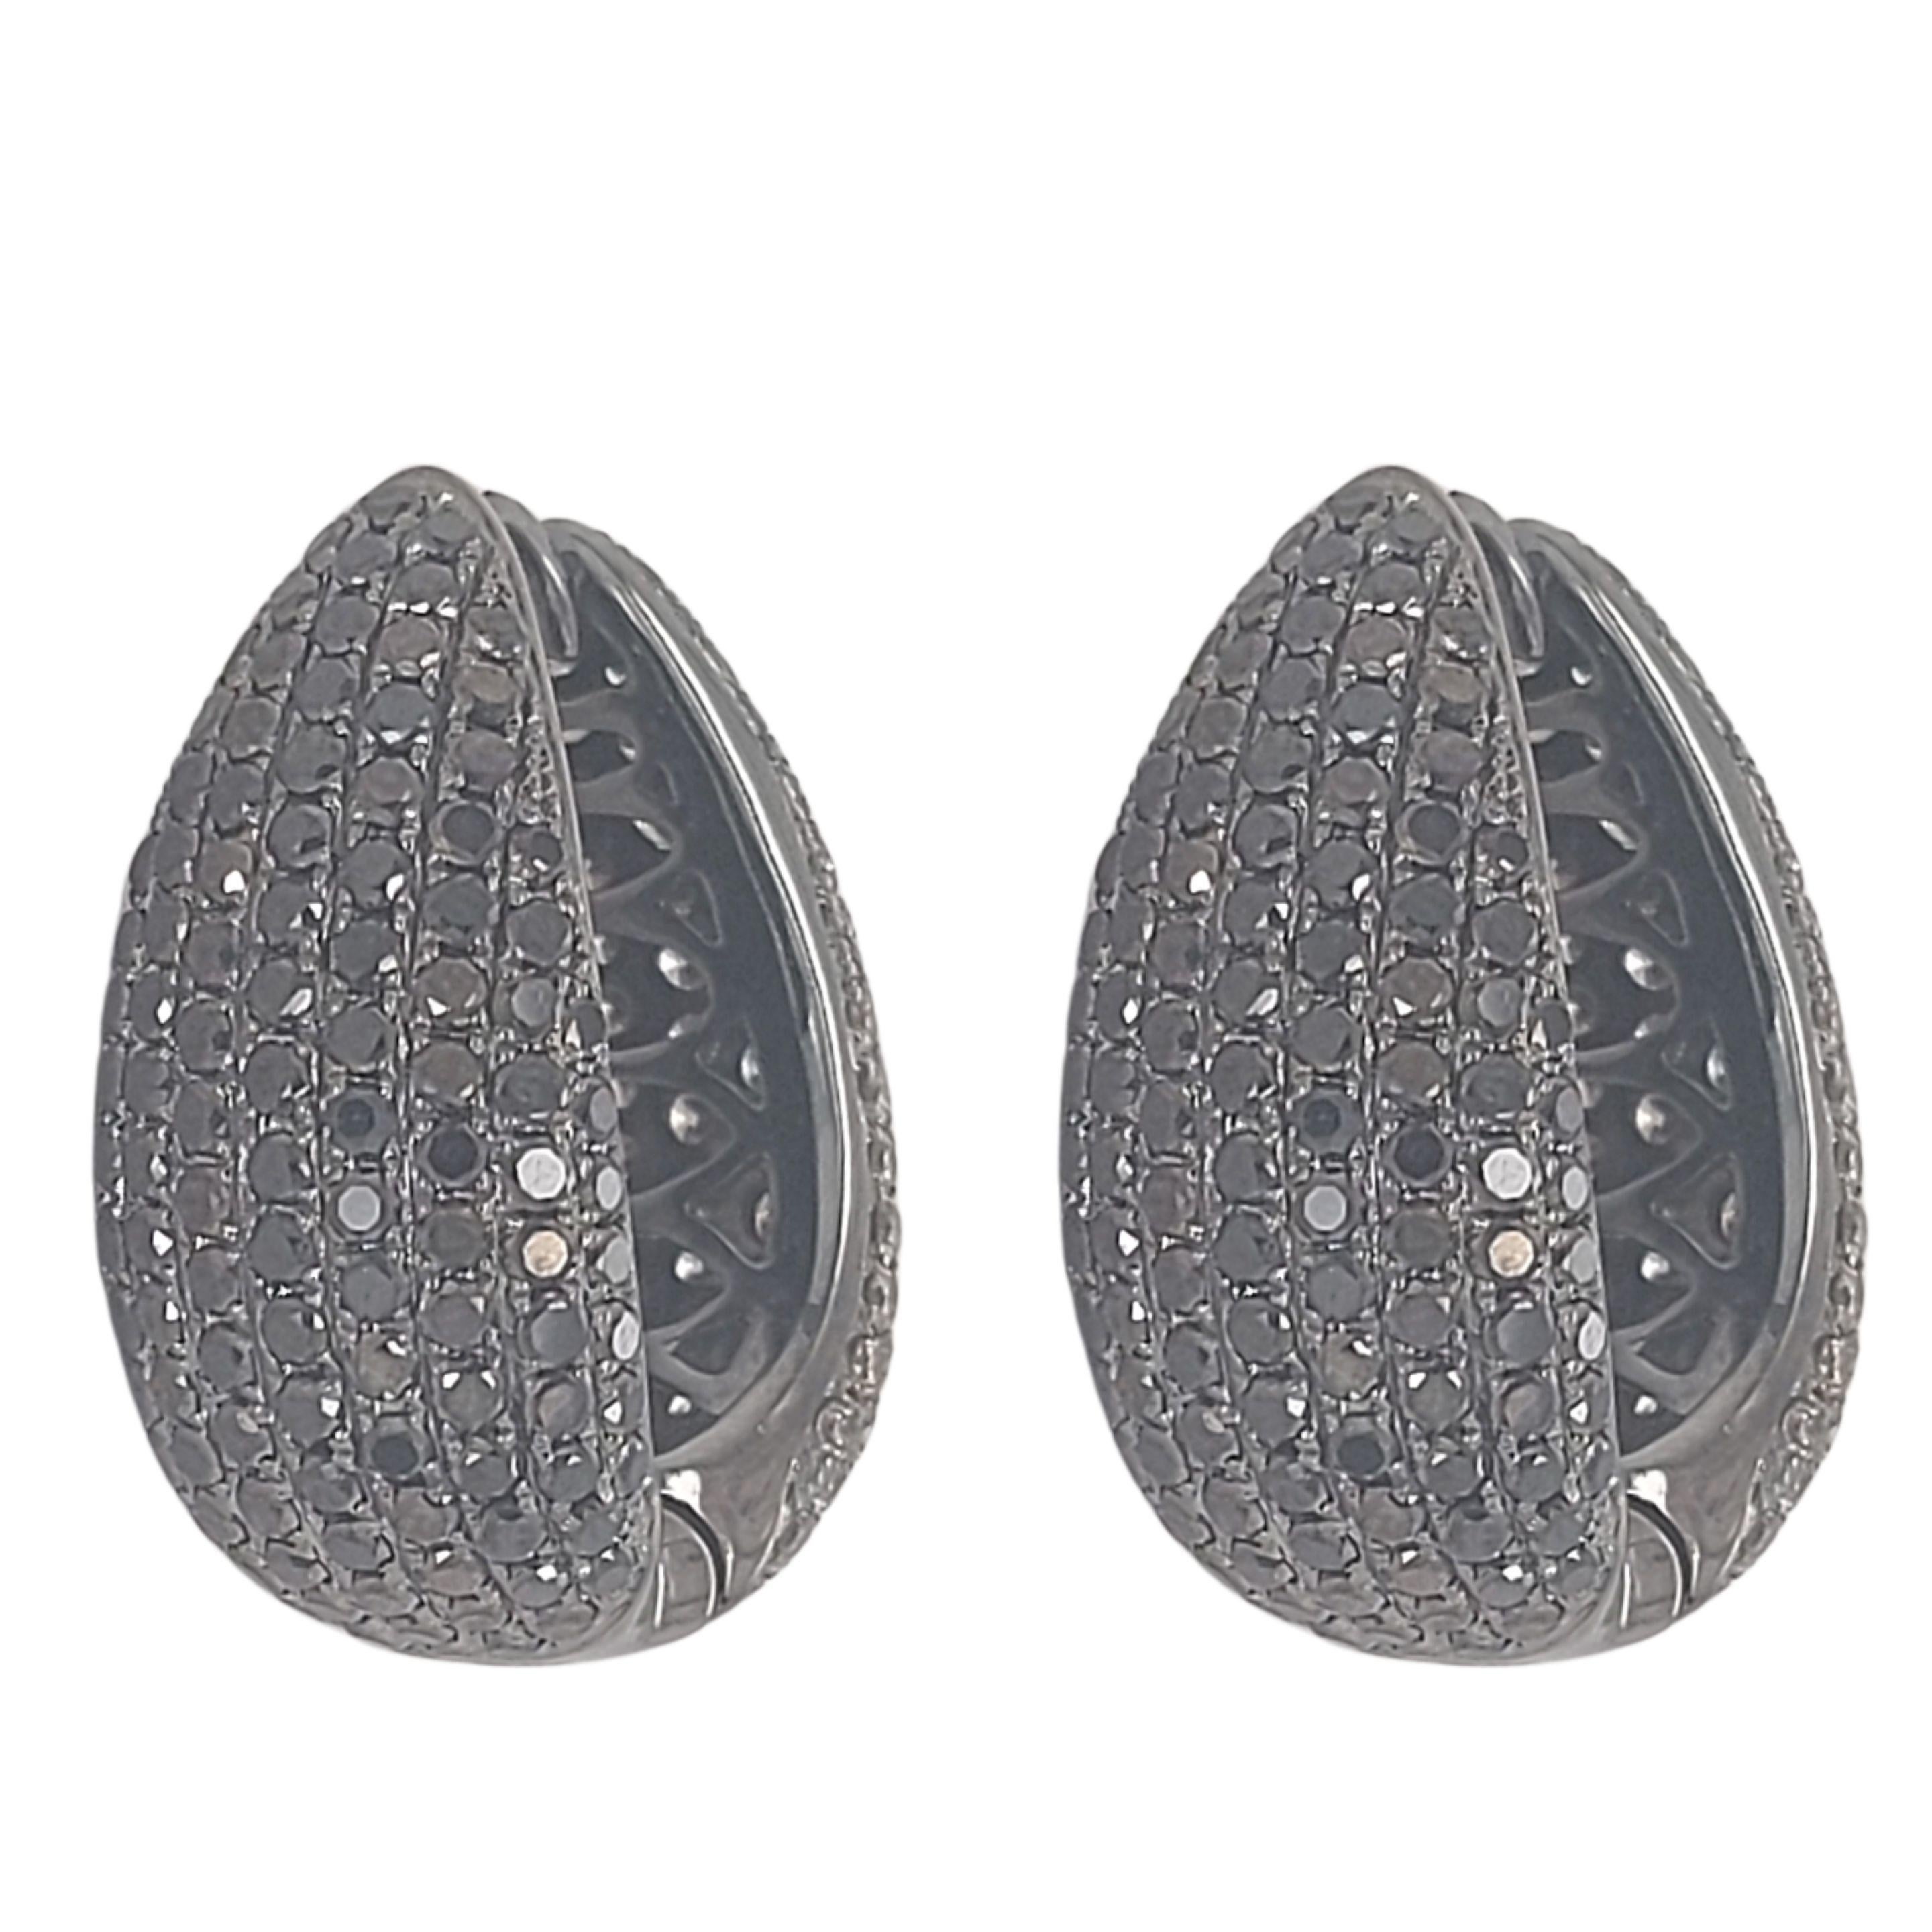 Magnificent 18kt Black Gold Earrings With 7.83ct Cognac and Black Diamonds

Can be worn from both sides ! Choose Cognac color diamonds or Black diamonds in fron,or one side black and one side cognact,

Diamonds: Cognac and Black Diamonds together